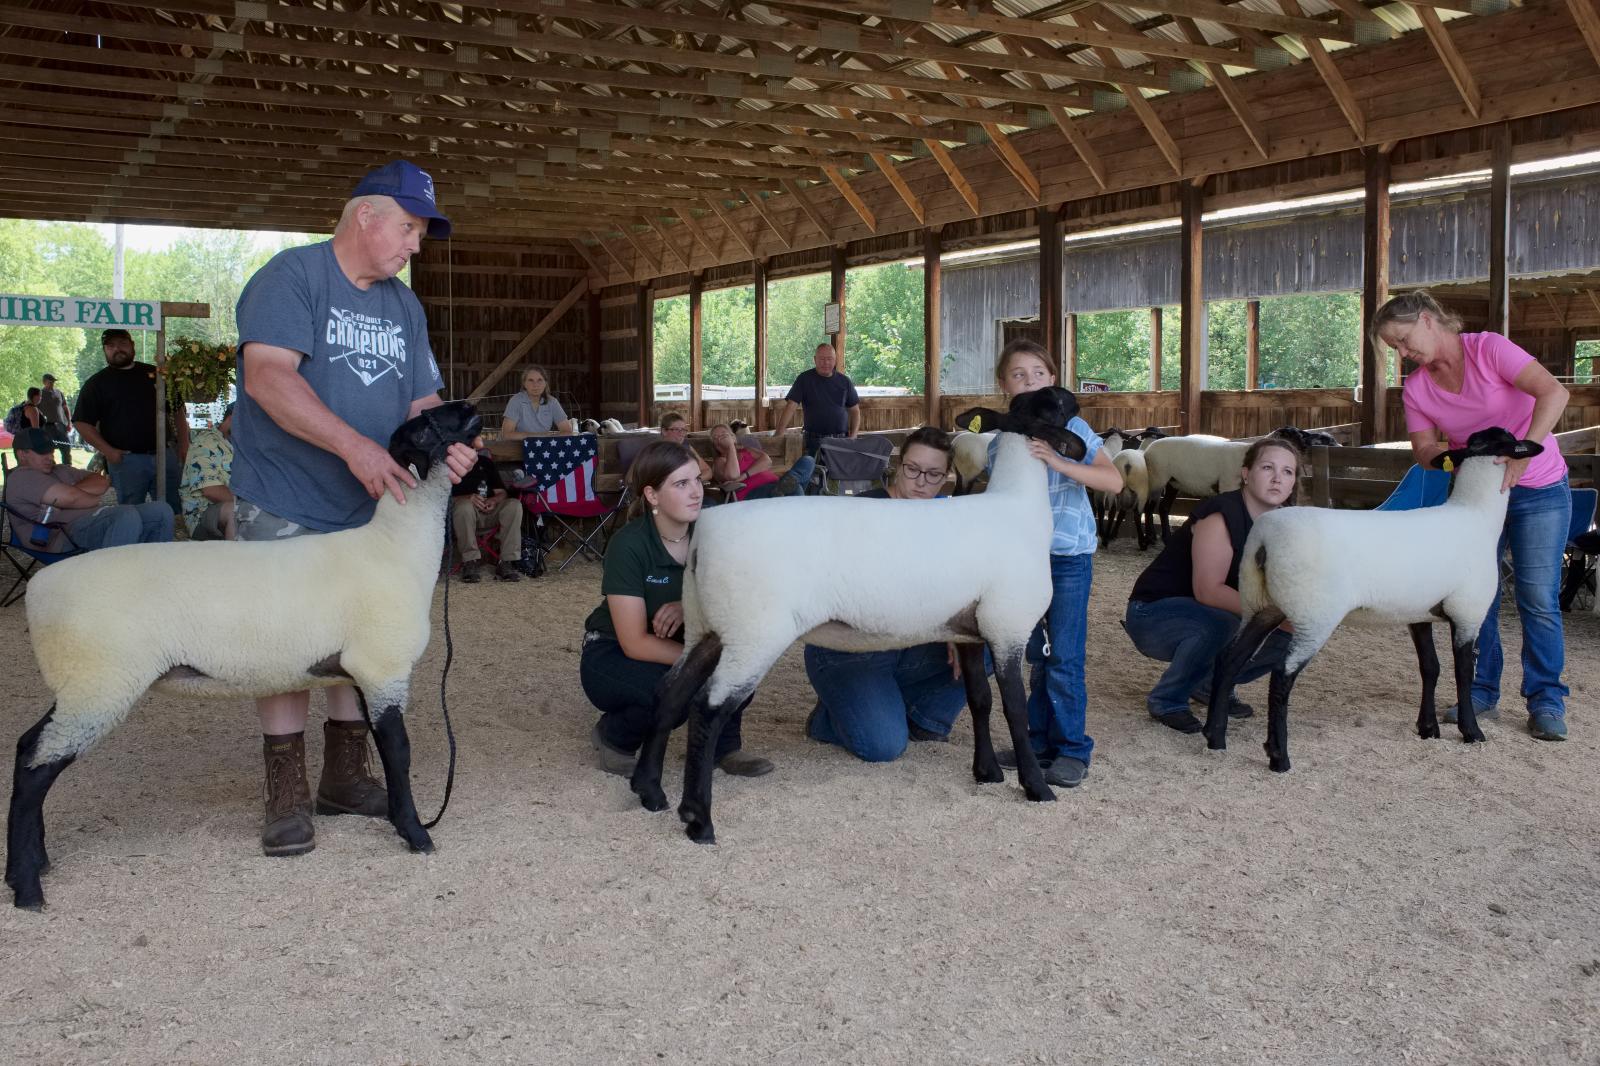 Cheshire County Fair Sheep Show | Buy this image